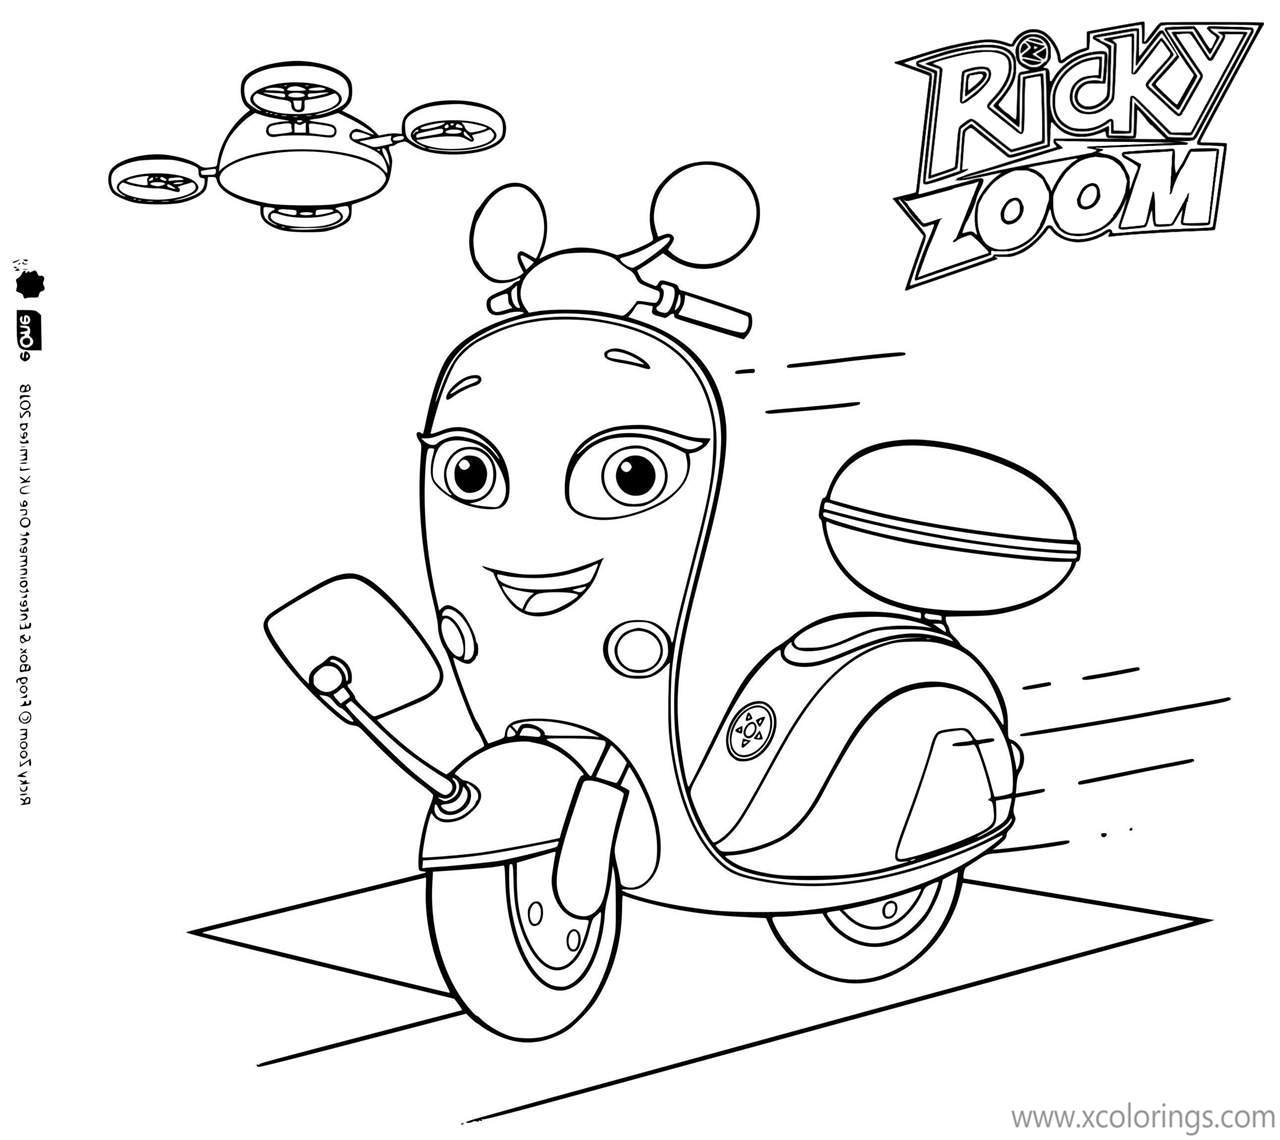 Free Ricky Zoom Character Scooter Coloring Pages Scootio printable